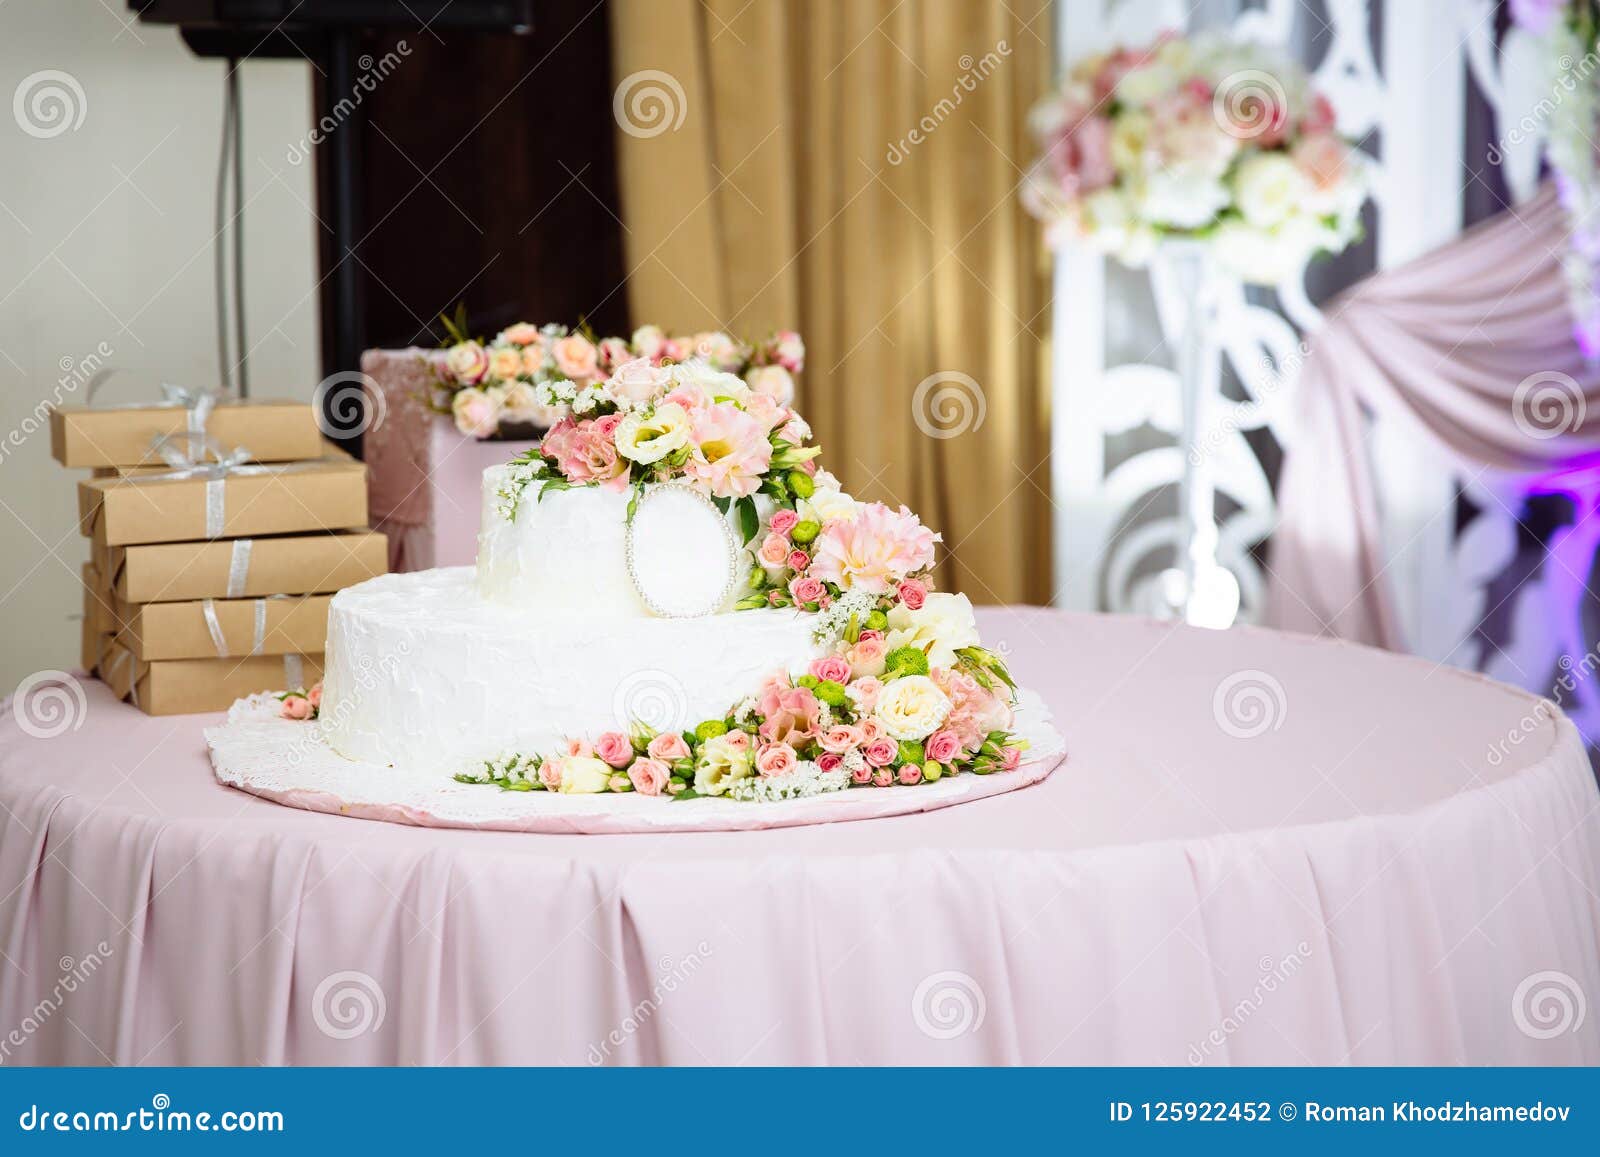 Close Up Photo Of A Wedding Cake Decorated With Fresh Flowers A